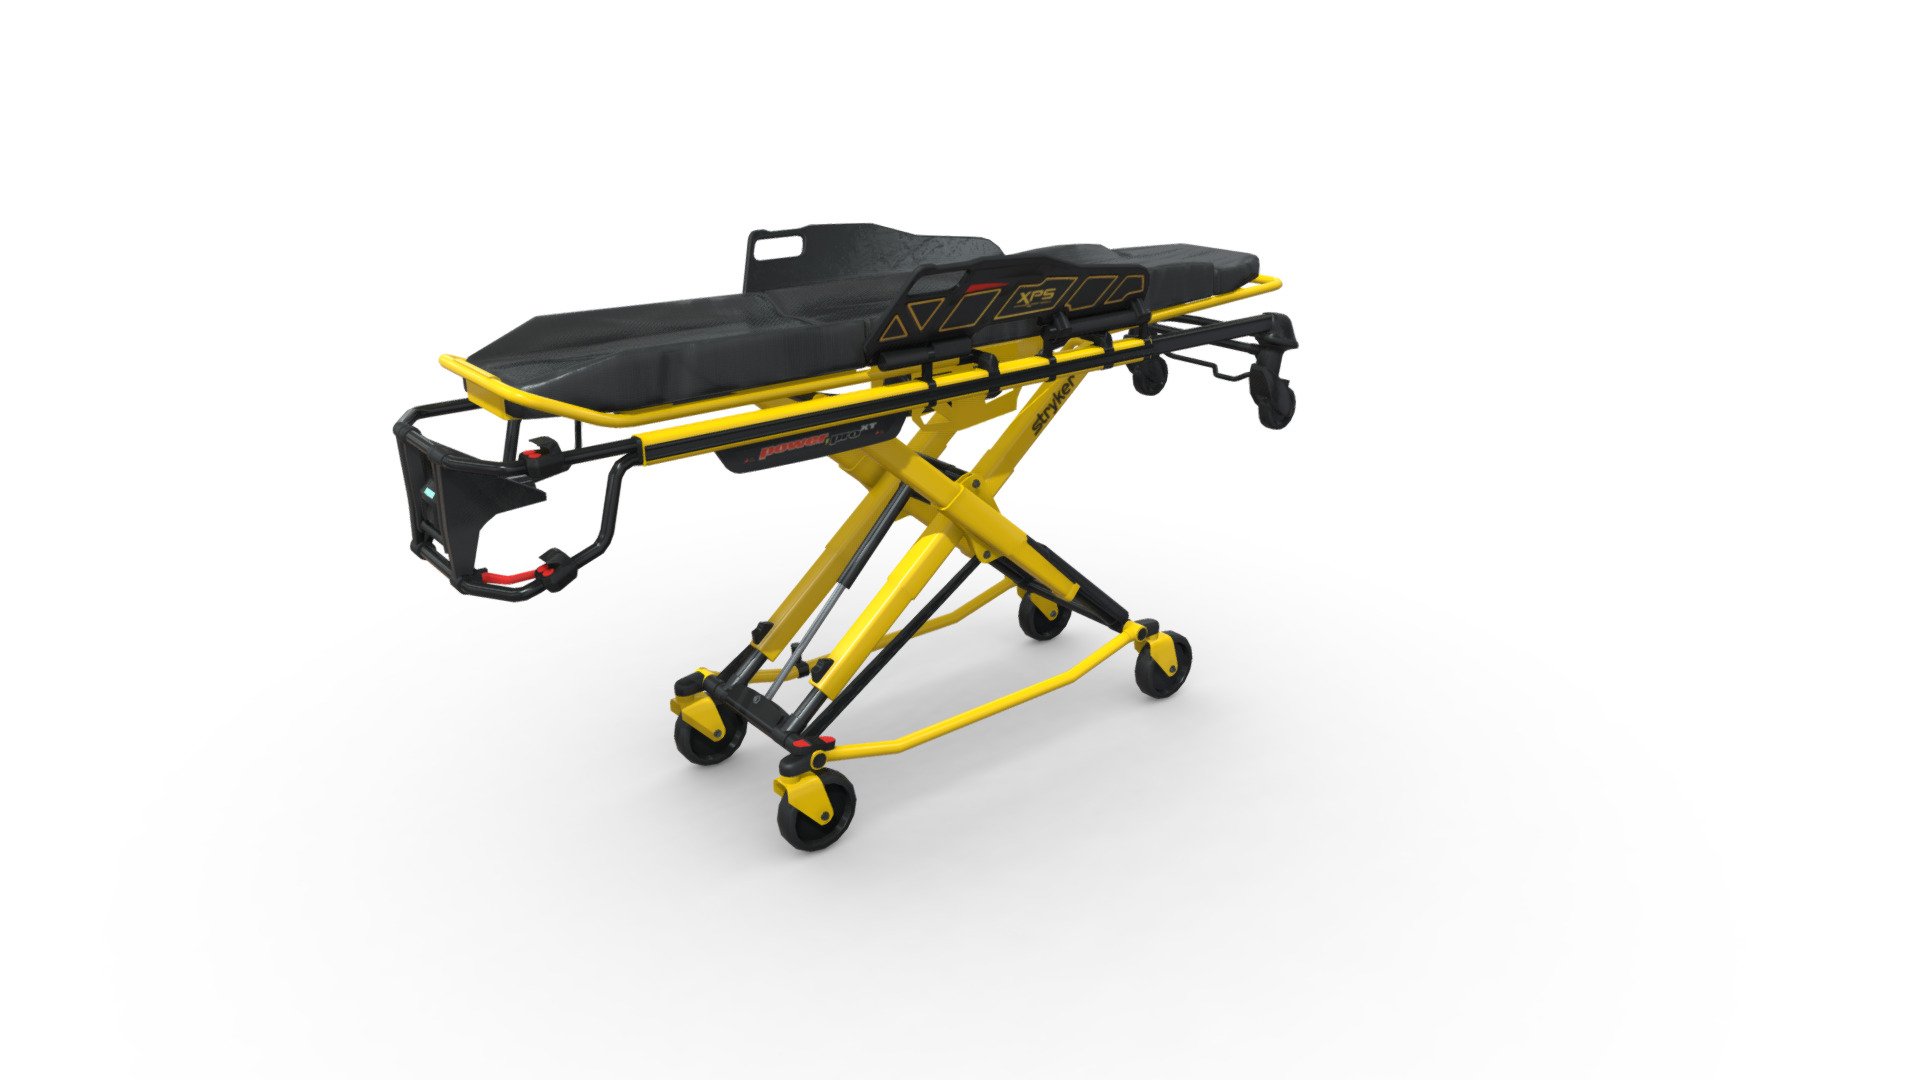 The Stryker Power Pro XT model 6506 is a cutting-edge powered ambulance cot, engineered to assist in the seamless lifting and lowering of the cot with its innovative battery-powered hydraulic system, activated at a simple button touch. Not only does this model exhibit an easy-to-use manual back-up system for utmost reliability, but its retractable head section is specifically designed for effortless navigation in tight spaces, irrespective of the height position. Further enhancing its functionality are features like the automatic high-speed retract, XPS Siderails, Steer-Lock system, and the SMRT Battery Kit, all meticulously integrated to meet the demanding standards of emergency medical services 3d model